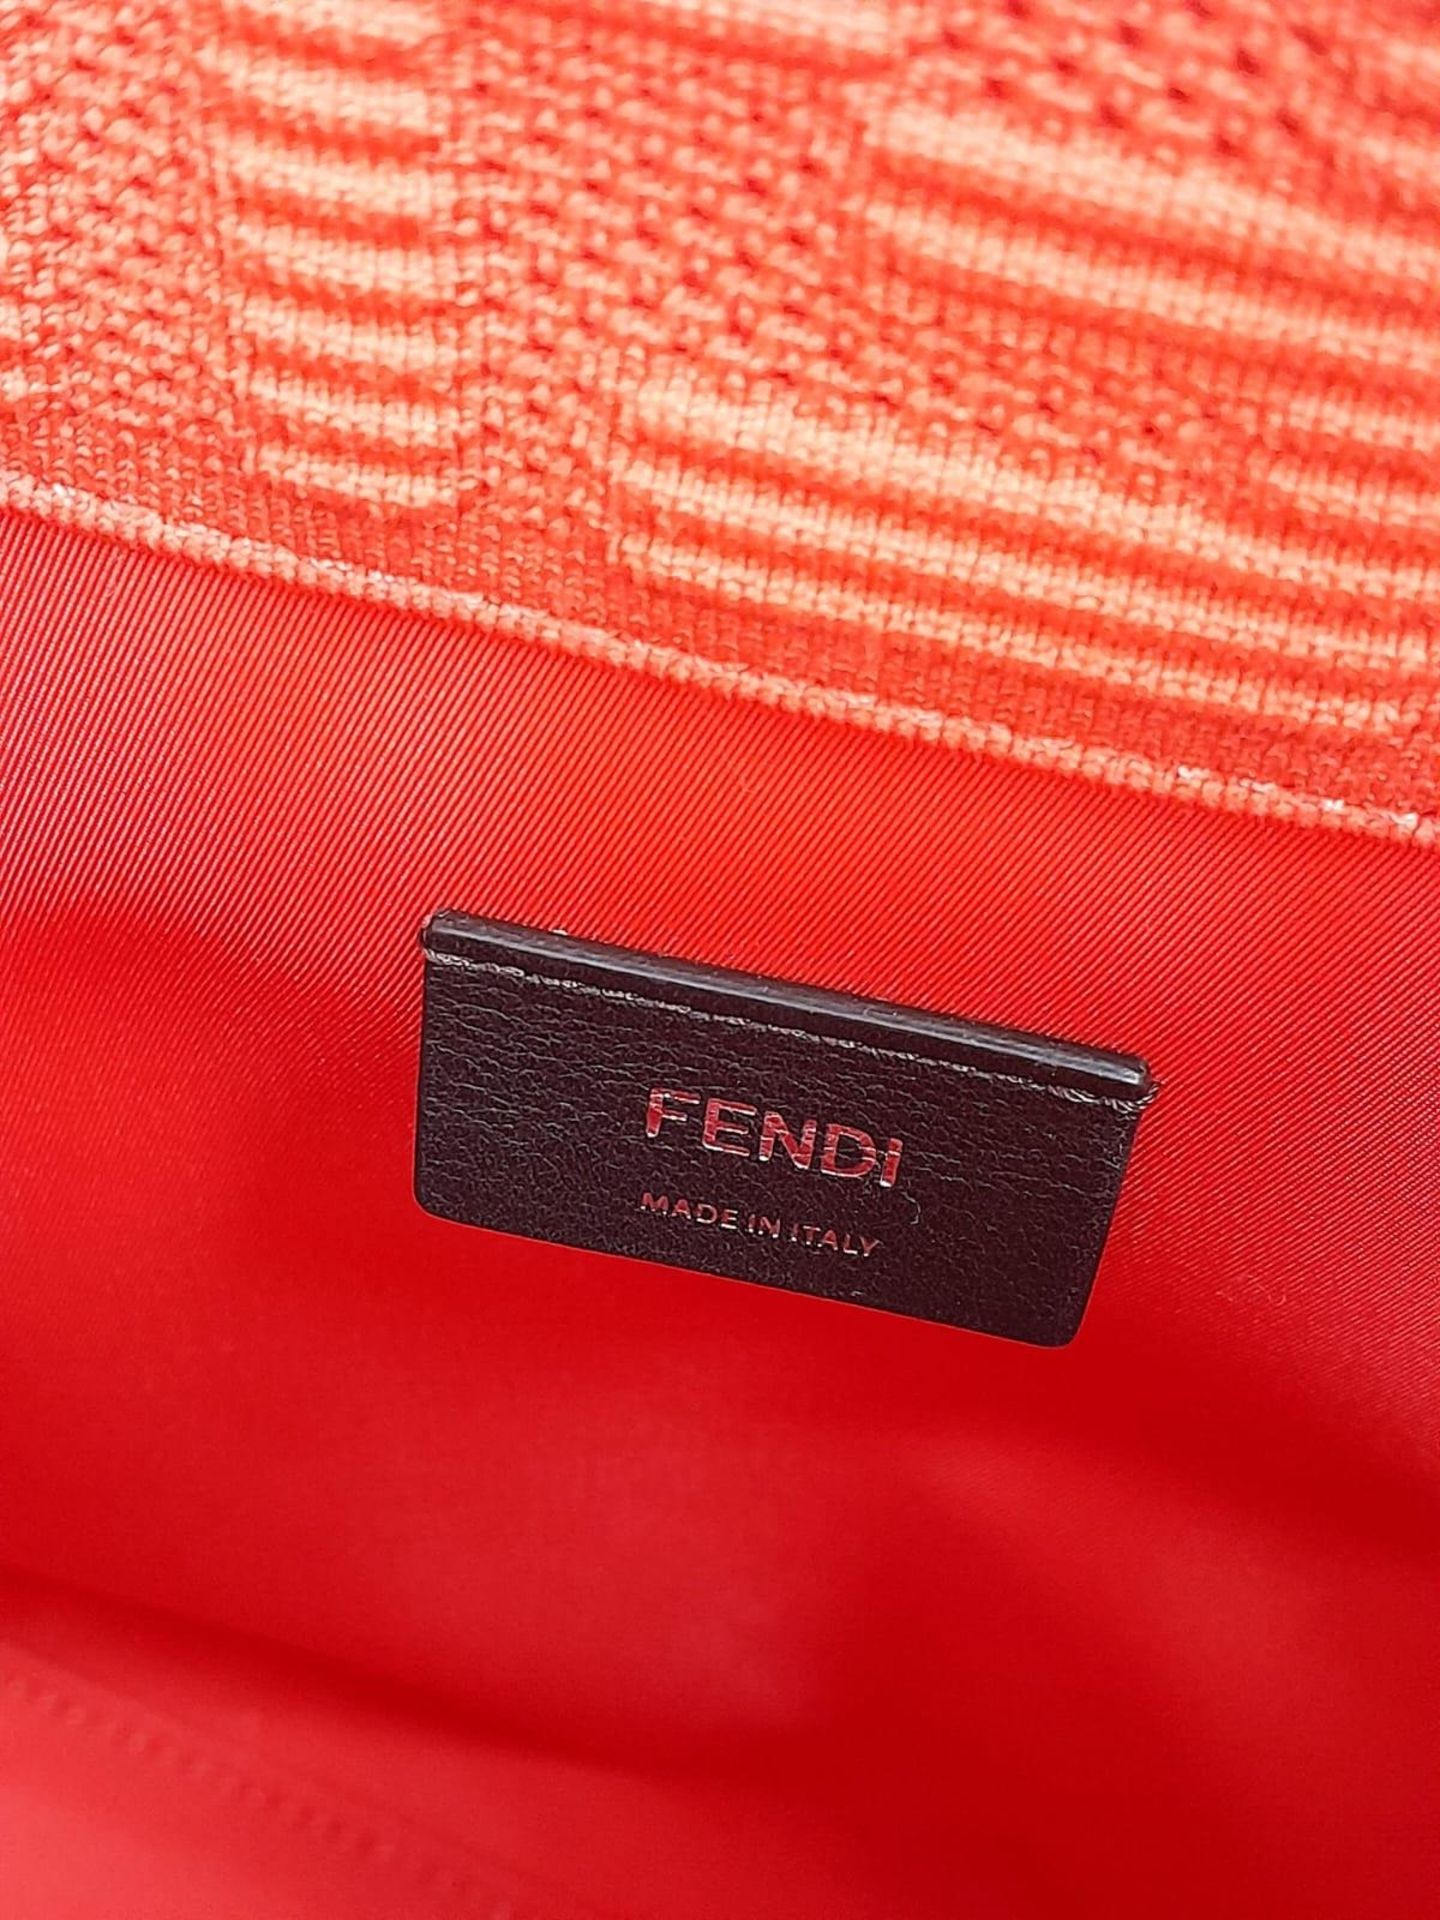 A Fendi Coral Sunshine Tote Bag. Textile exterior with leather trim, silver-toned hardware and two - Image 6 of 7